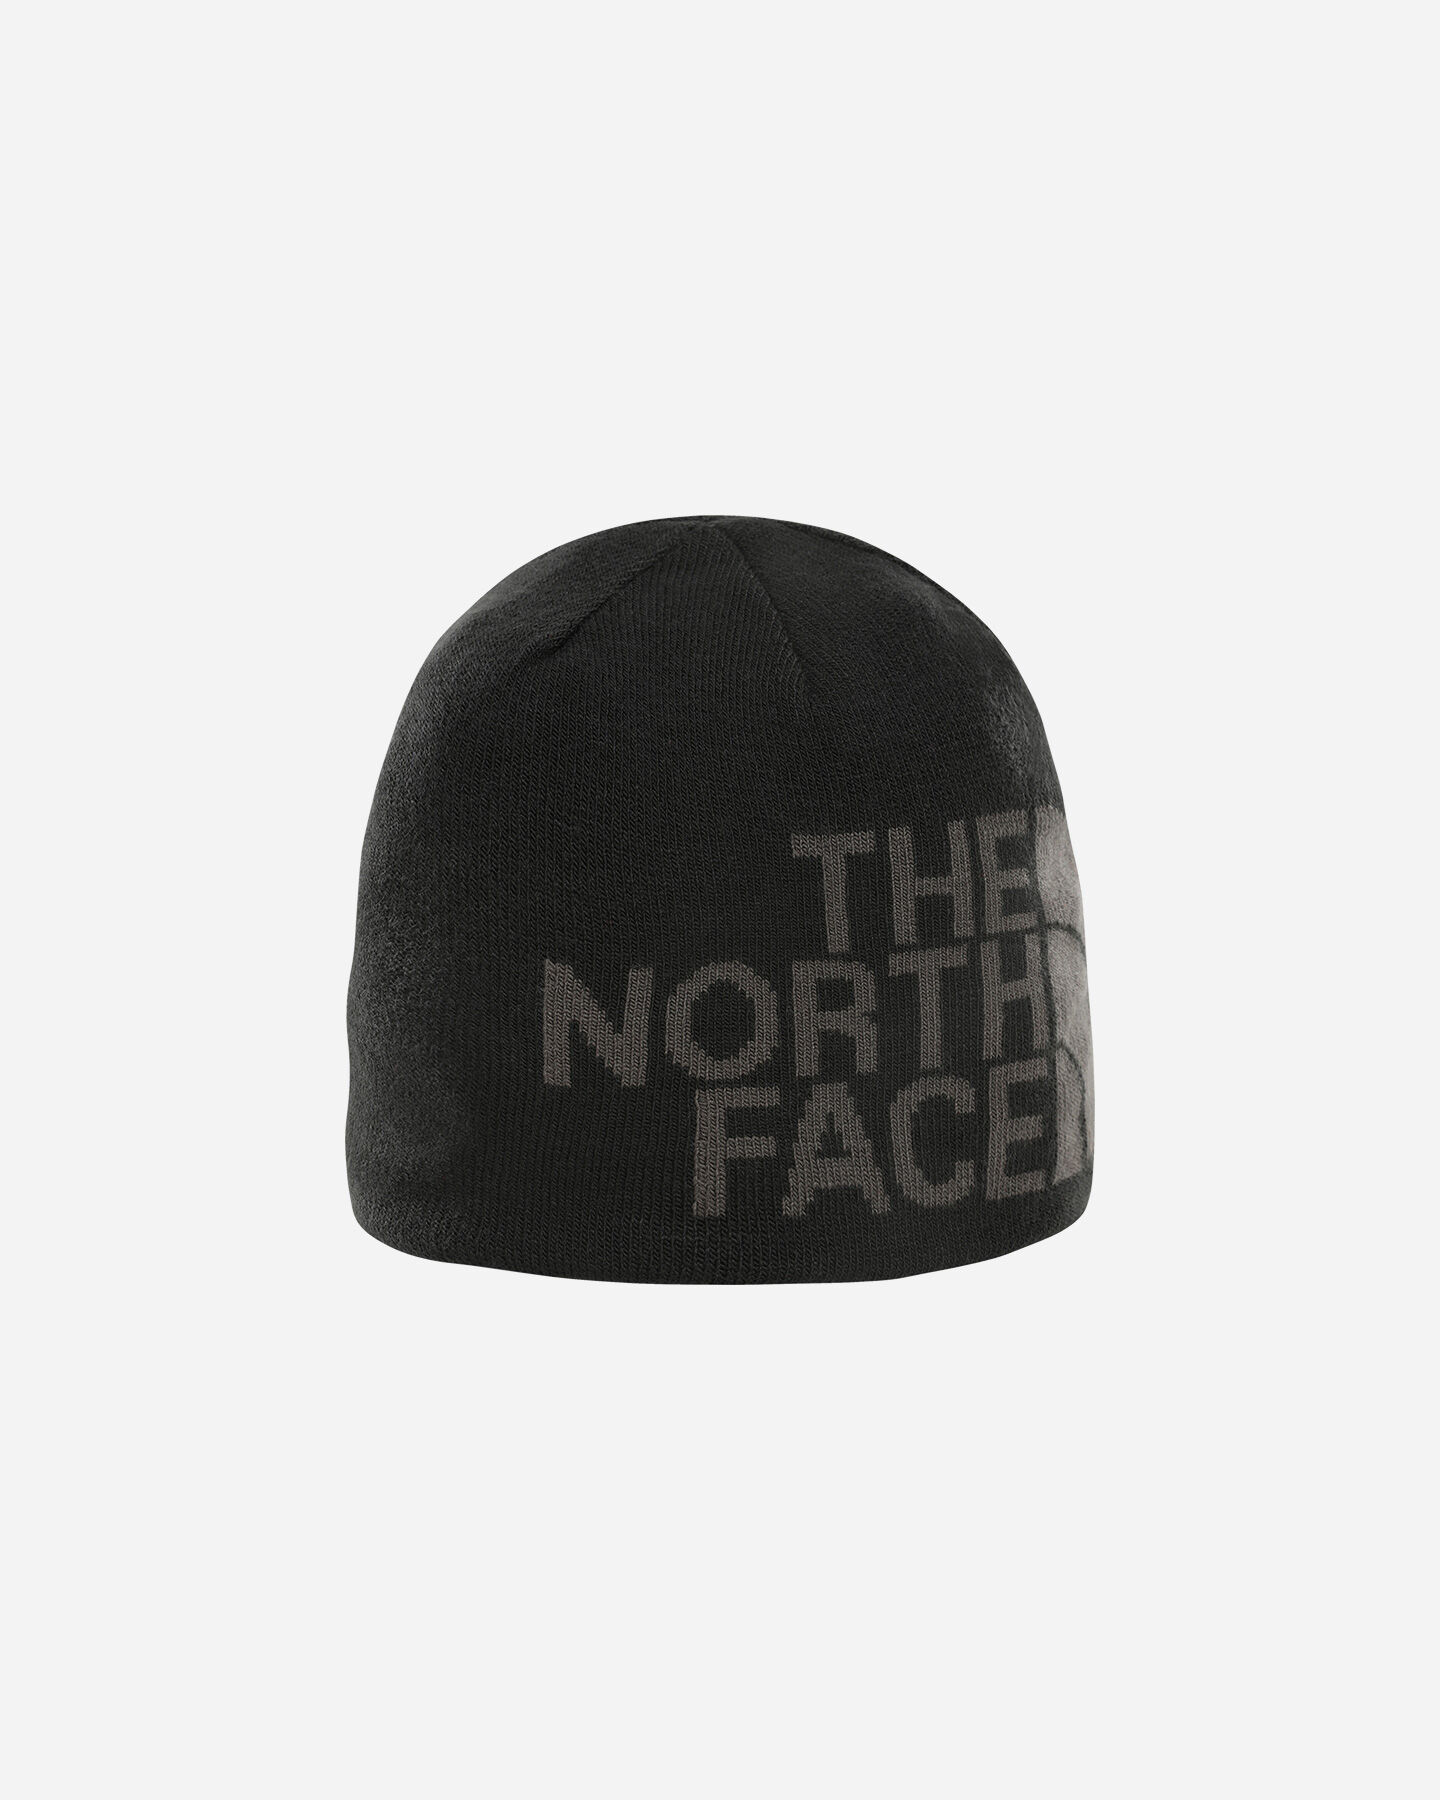  Berretto THE NORTH FACE BANNER DOUBLE-FACE S5123326|G92|OS scatto 0